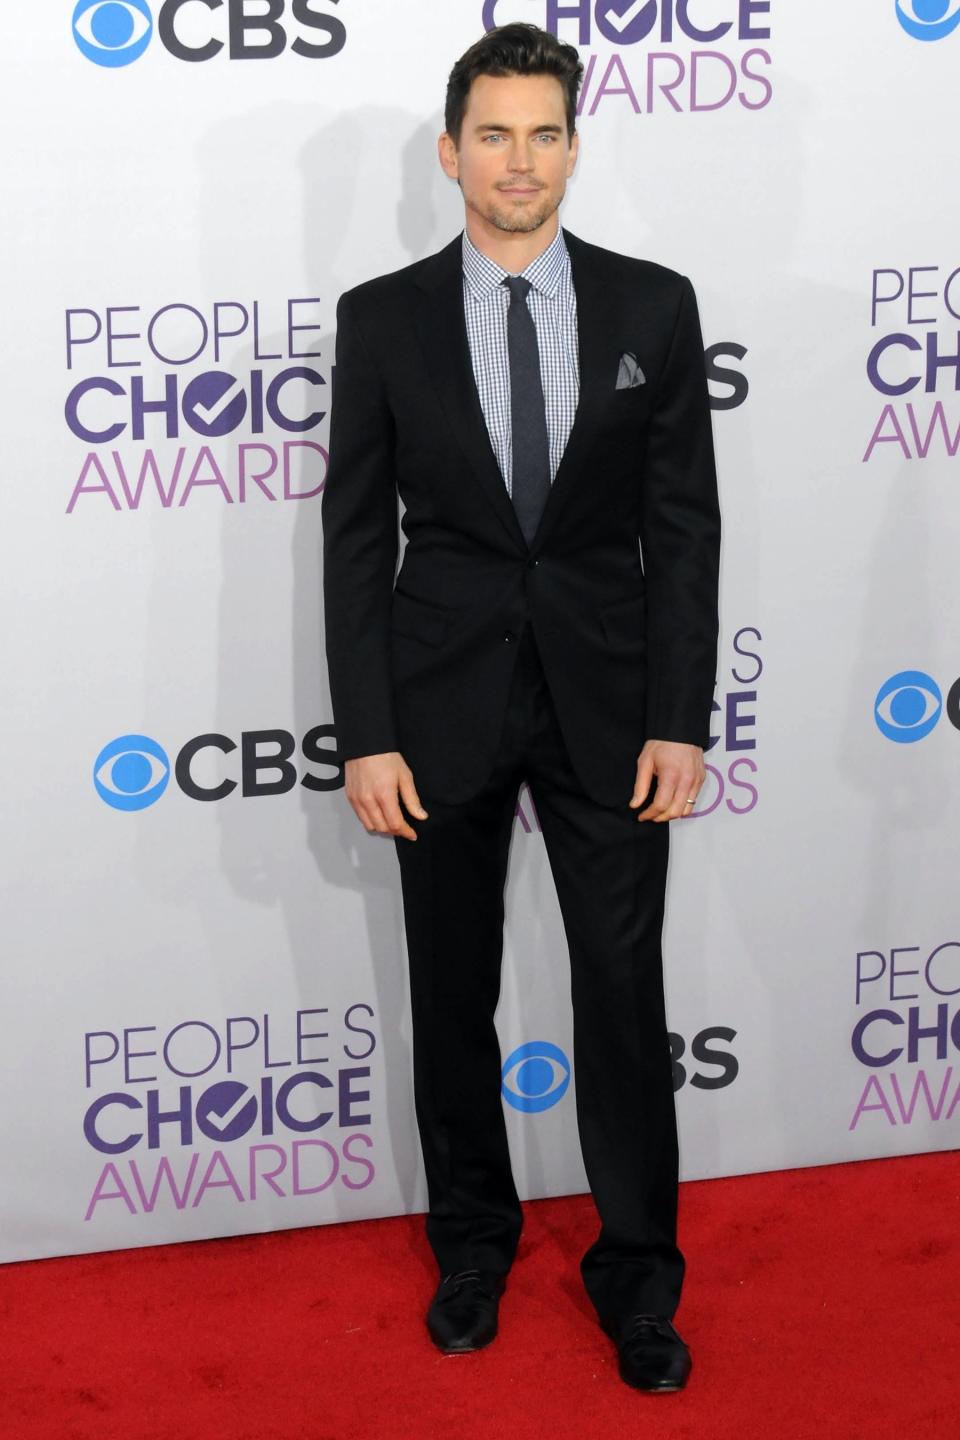 Matt Bomer, People's Choice Awards, leather brogues, dress shoes, suits, suiting, loafers, brogues, shoes, footwear, menswear, men's style, celebrity style, celebrity red carpet, red carpet, premiere